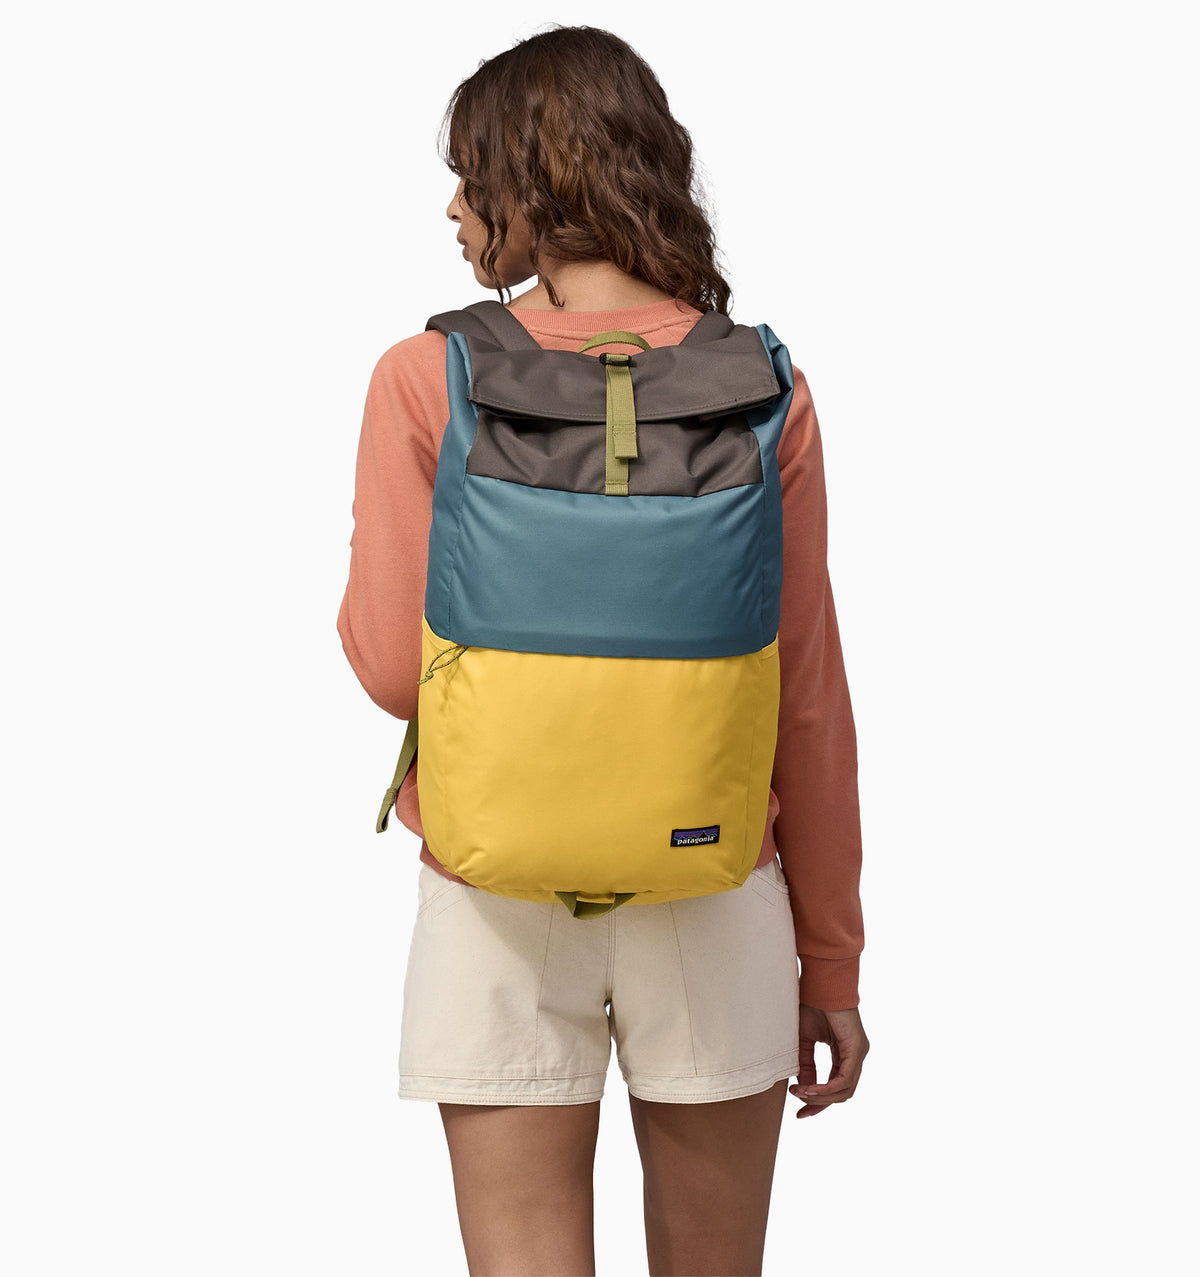 Patagonia 15" Fieldsmith Roll-Top Pack 30L - Surfboard Yellow